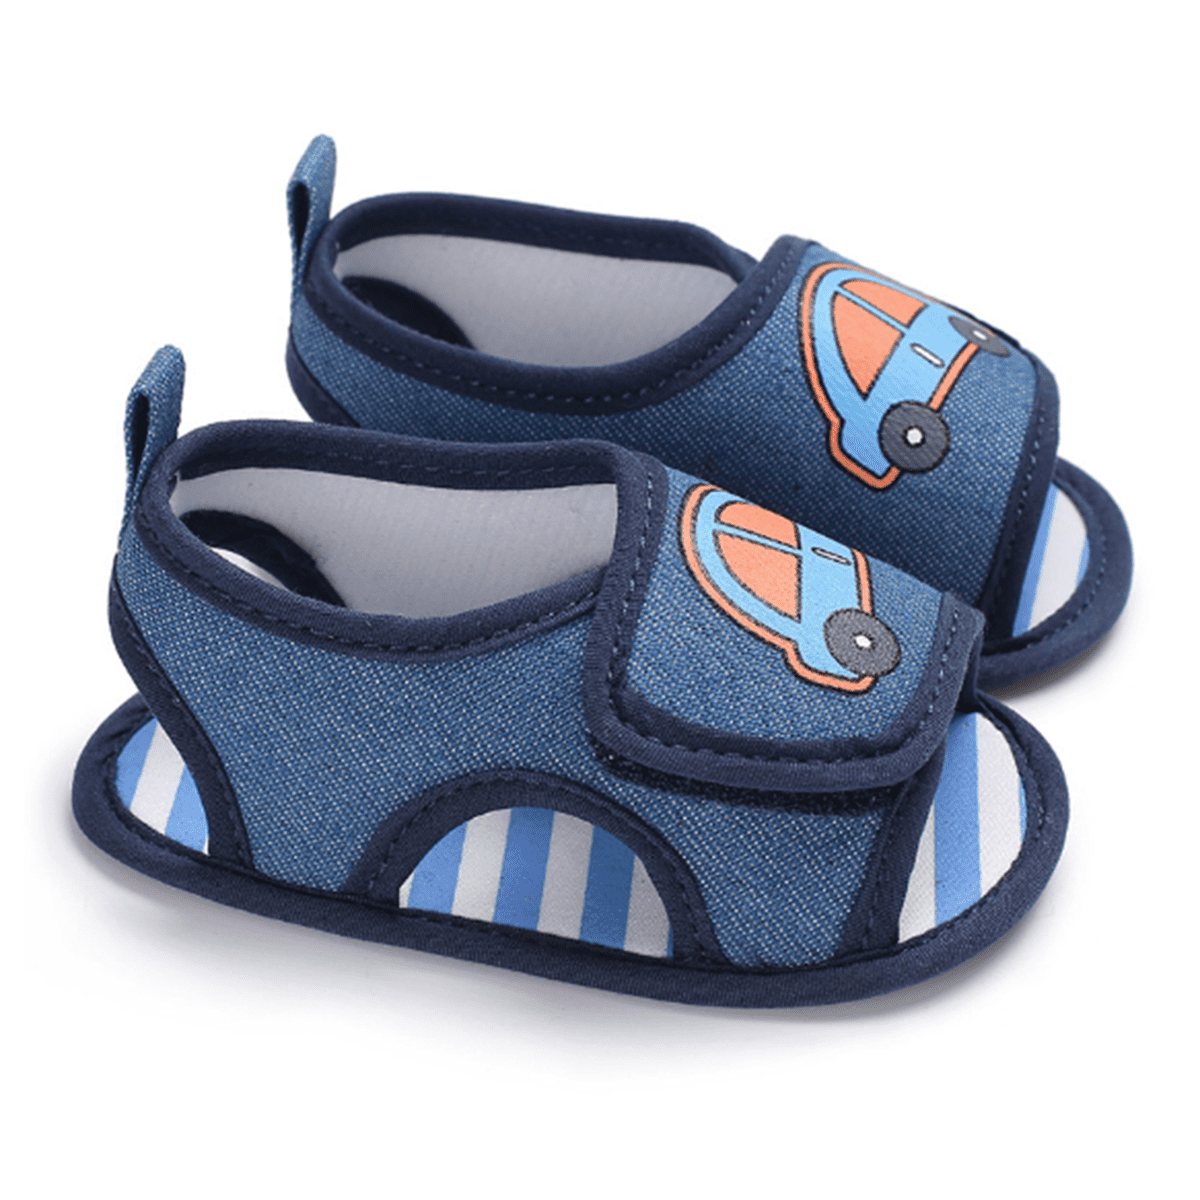 Iuhan 0-4Years Baby Kids Shoes Children Boys Sandals Shoes Baby Boys Sandals